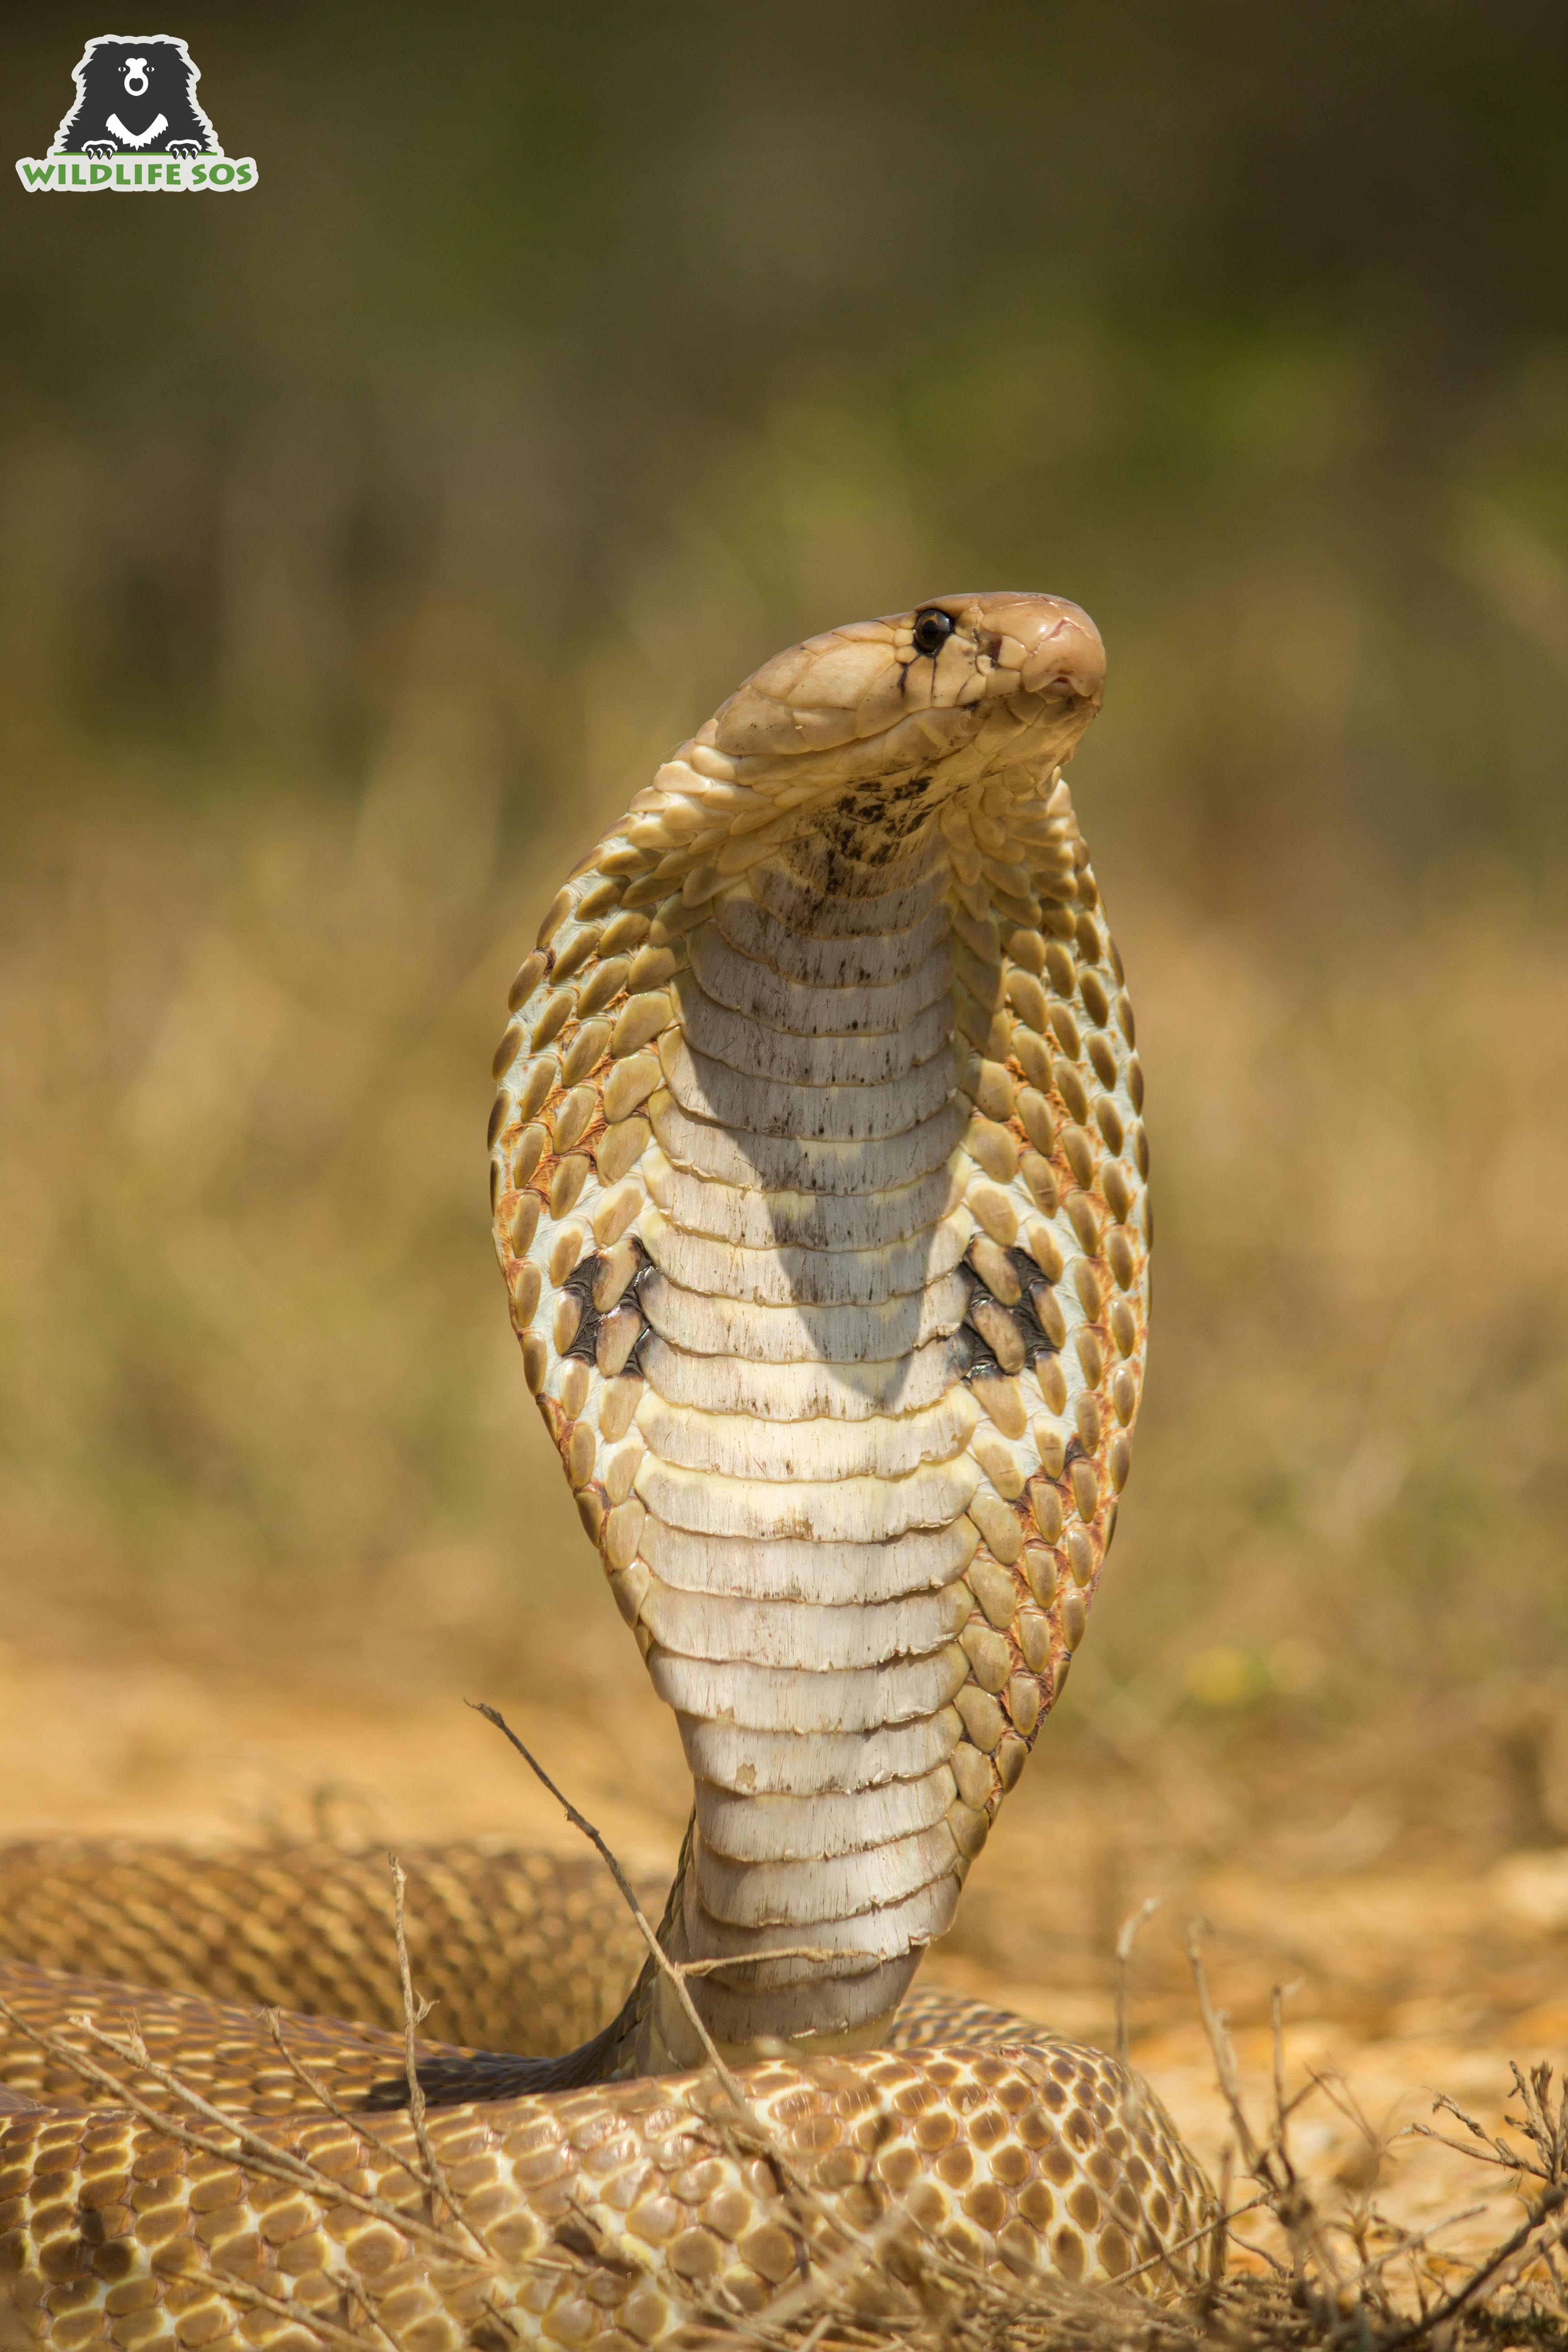 Snakes Are Not Meant For Entertainment - Wildlife SOS